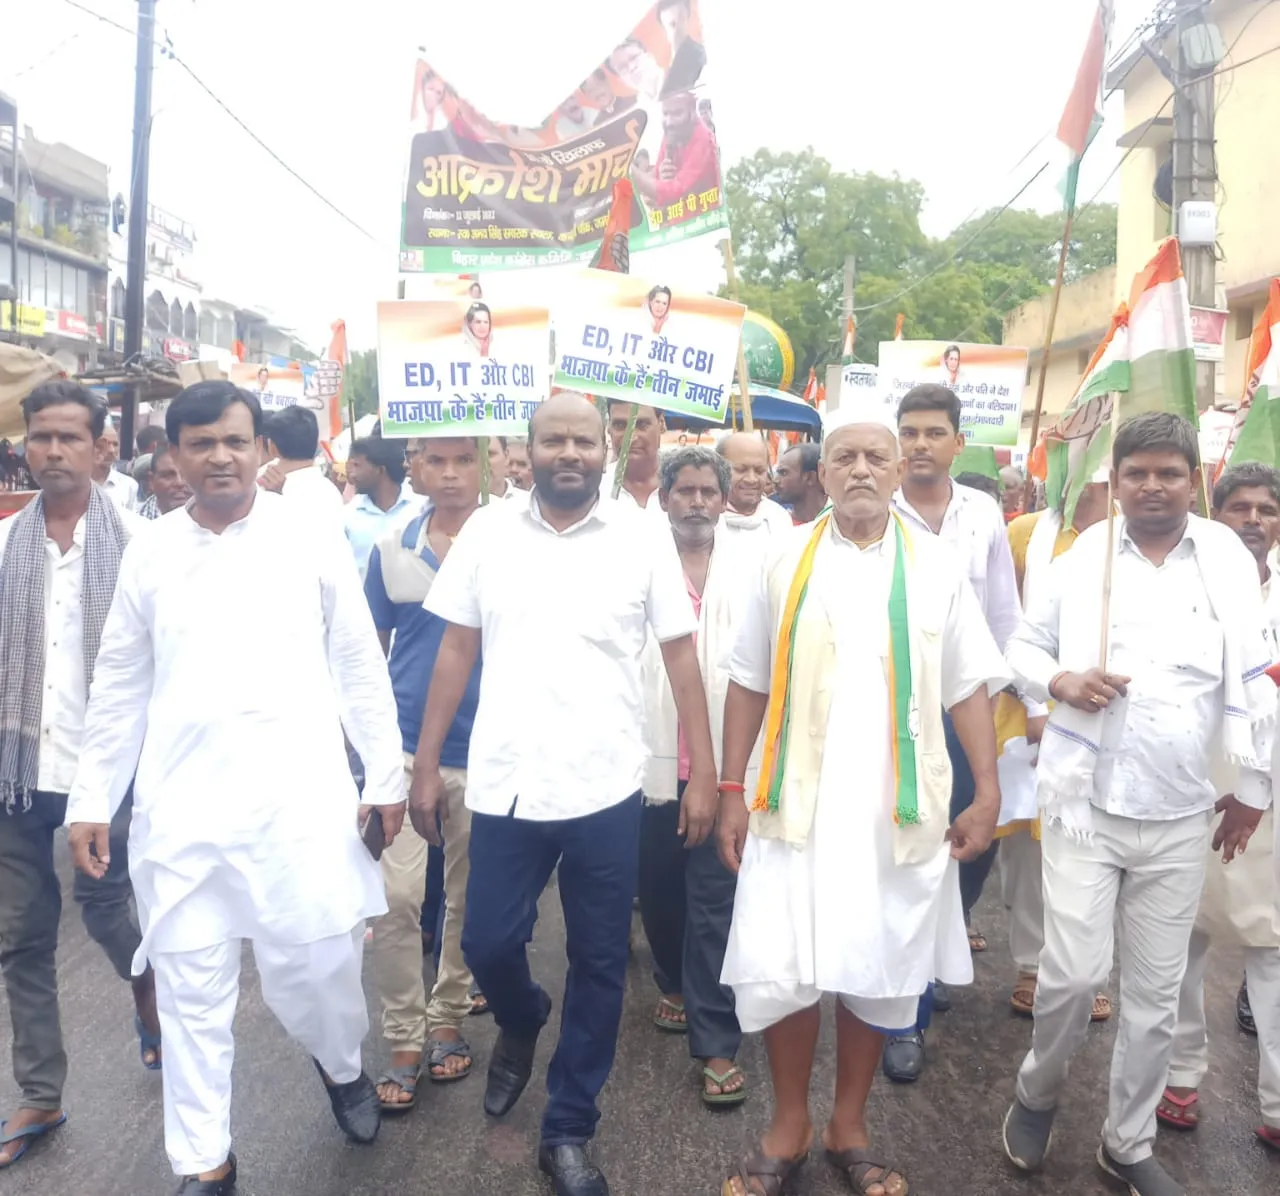 Congress supporters of Jamui took to the road to protest